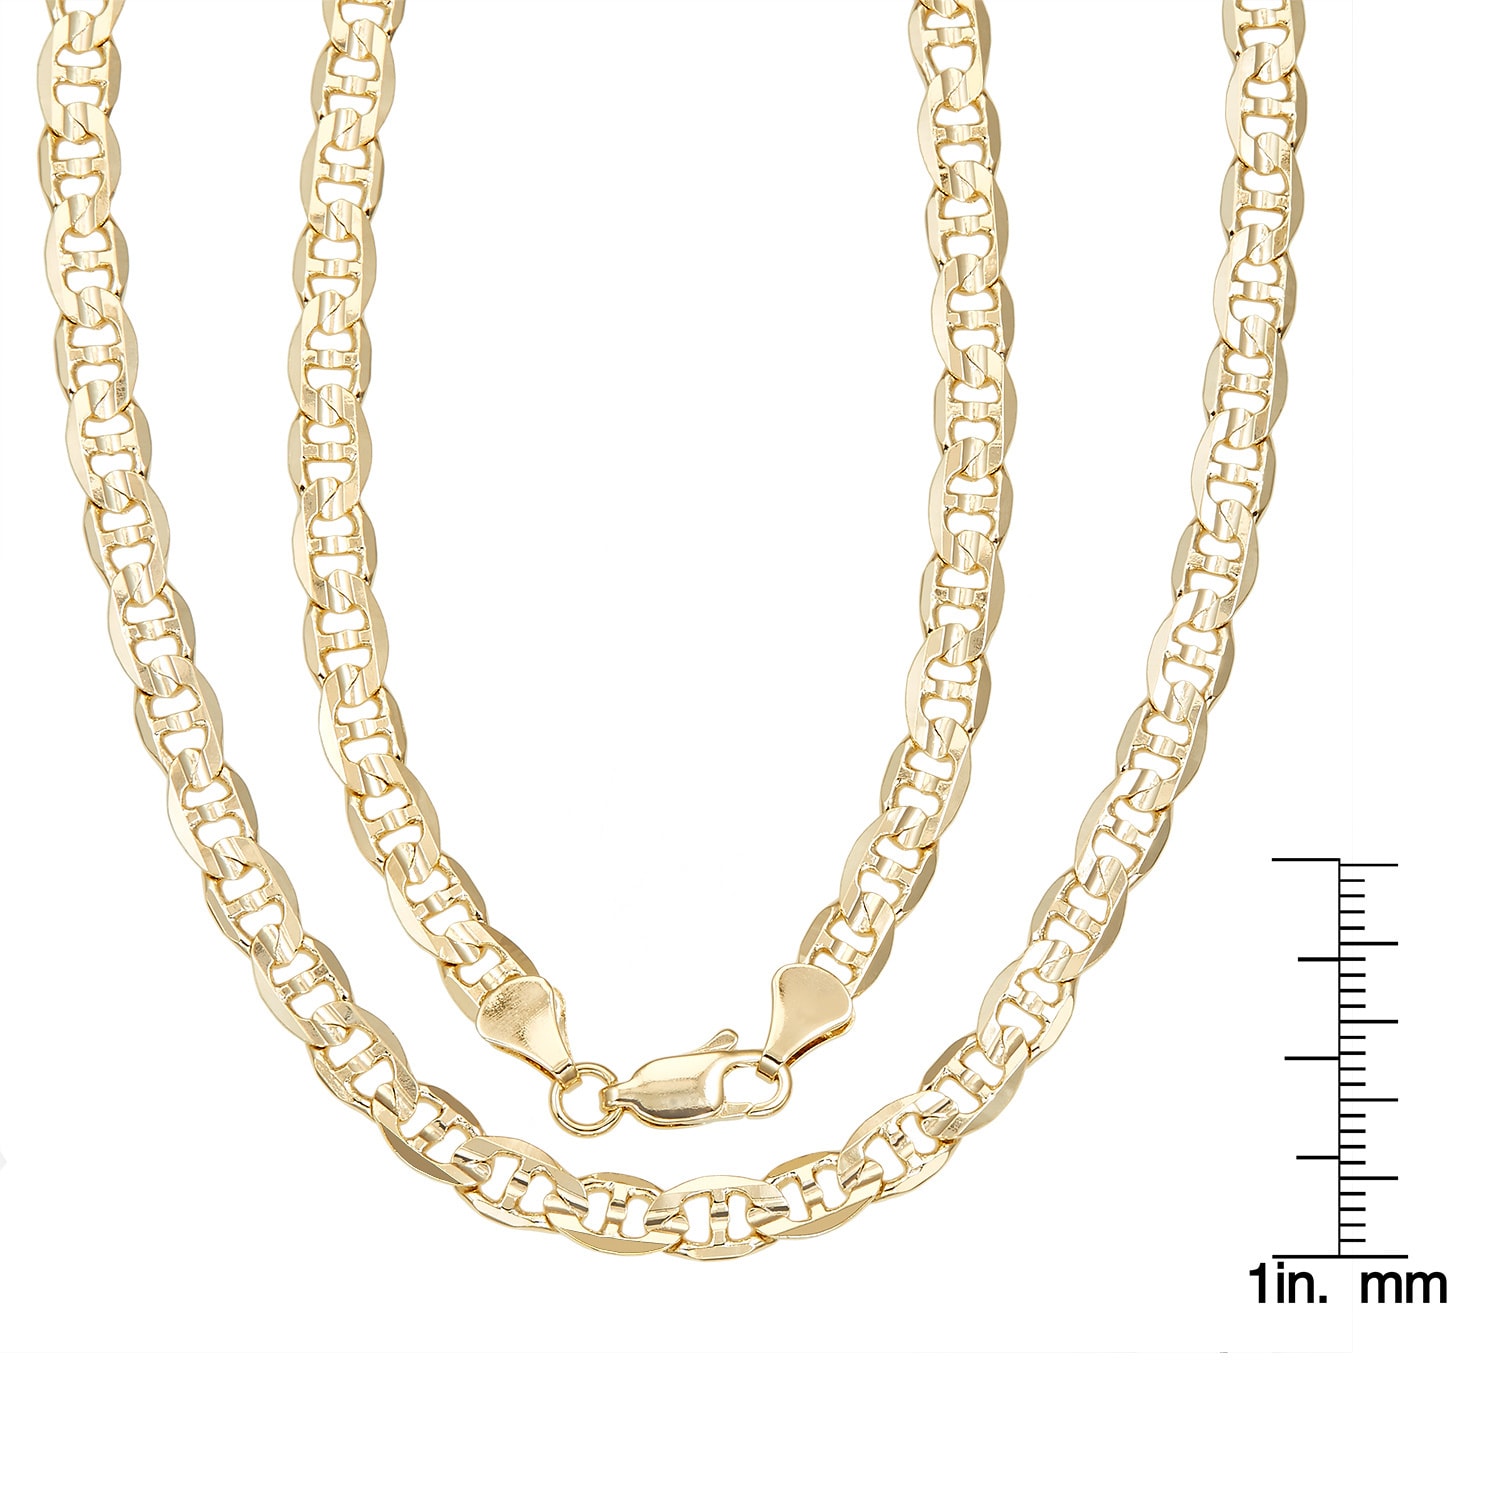 gucci necklace gold